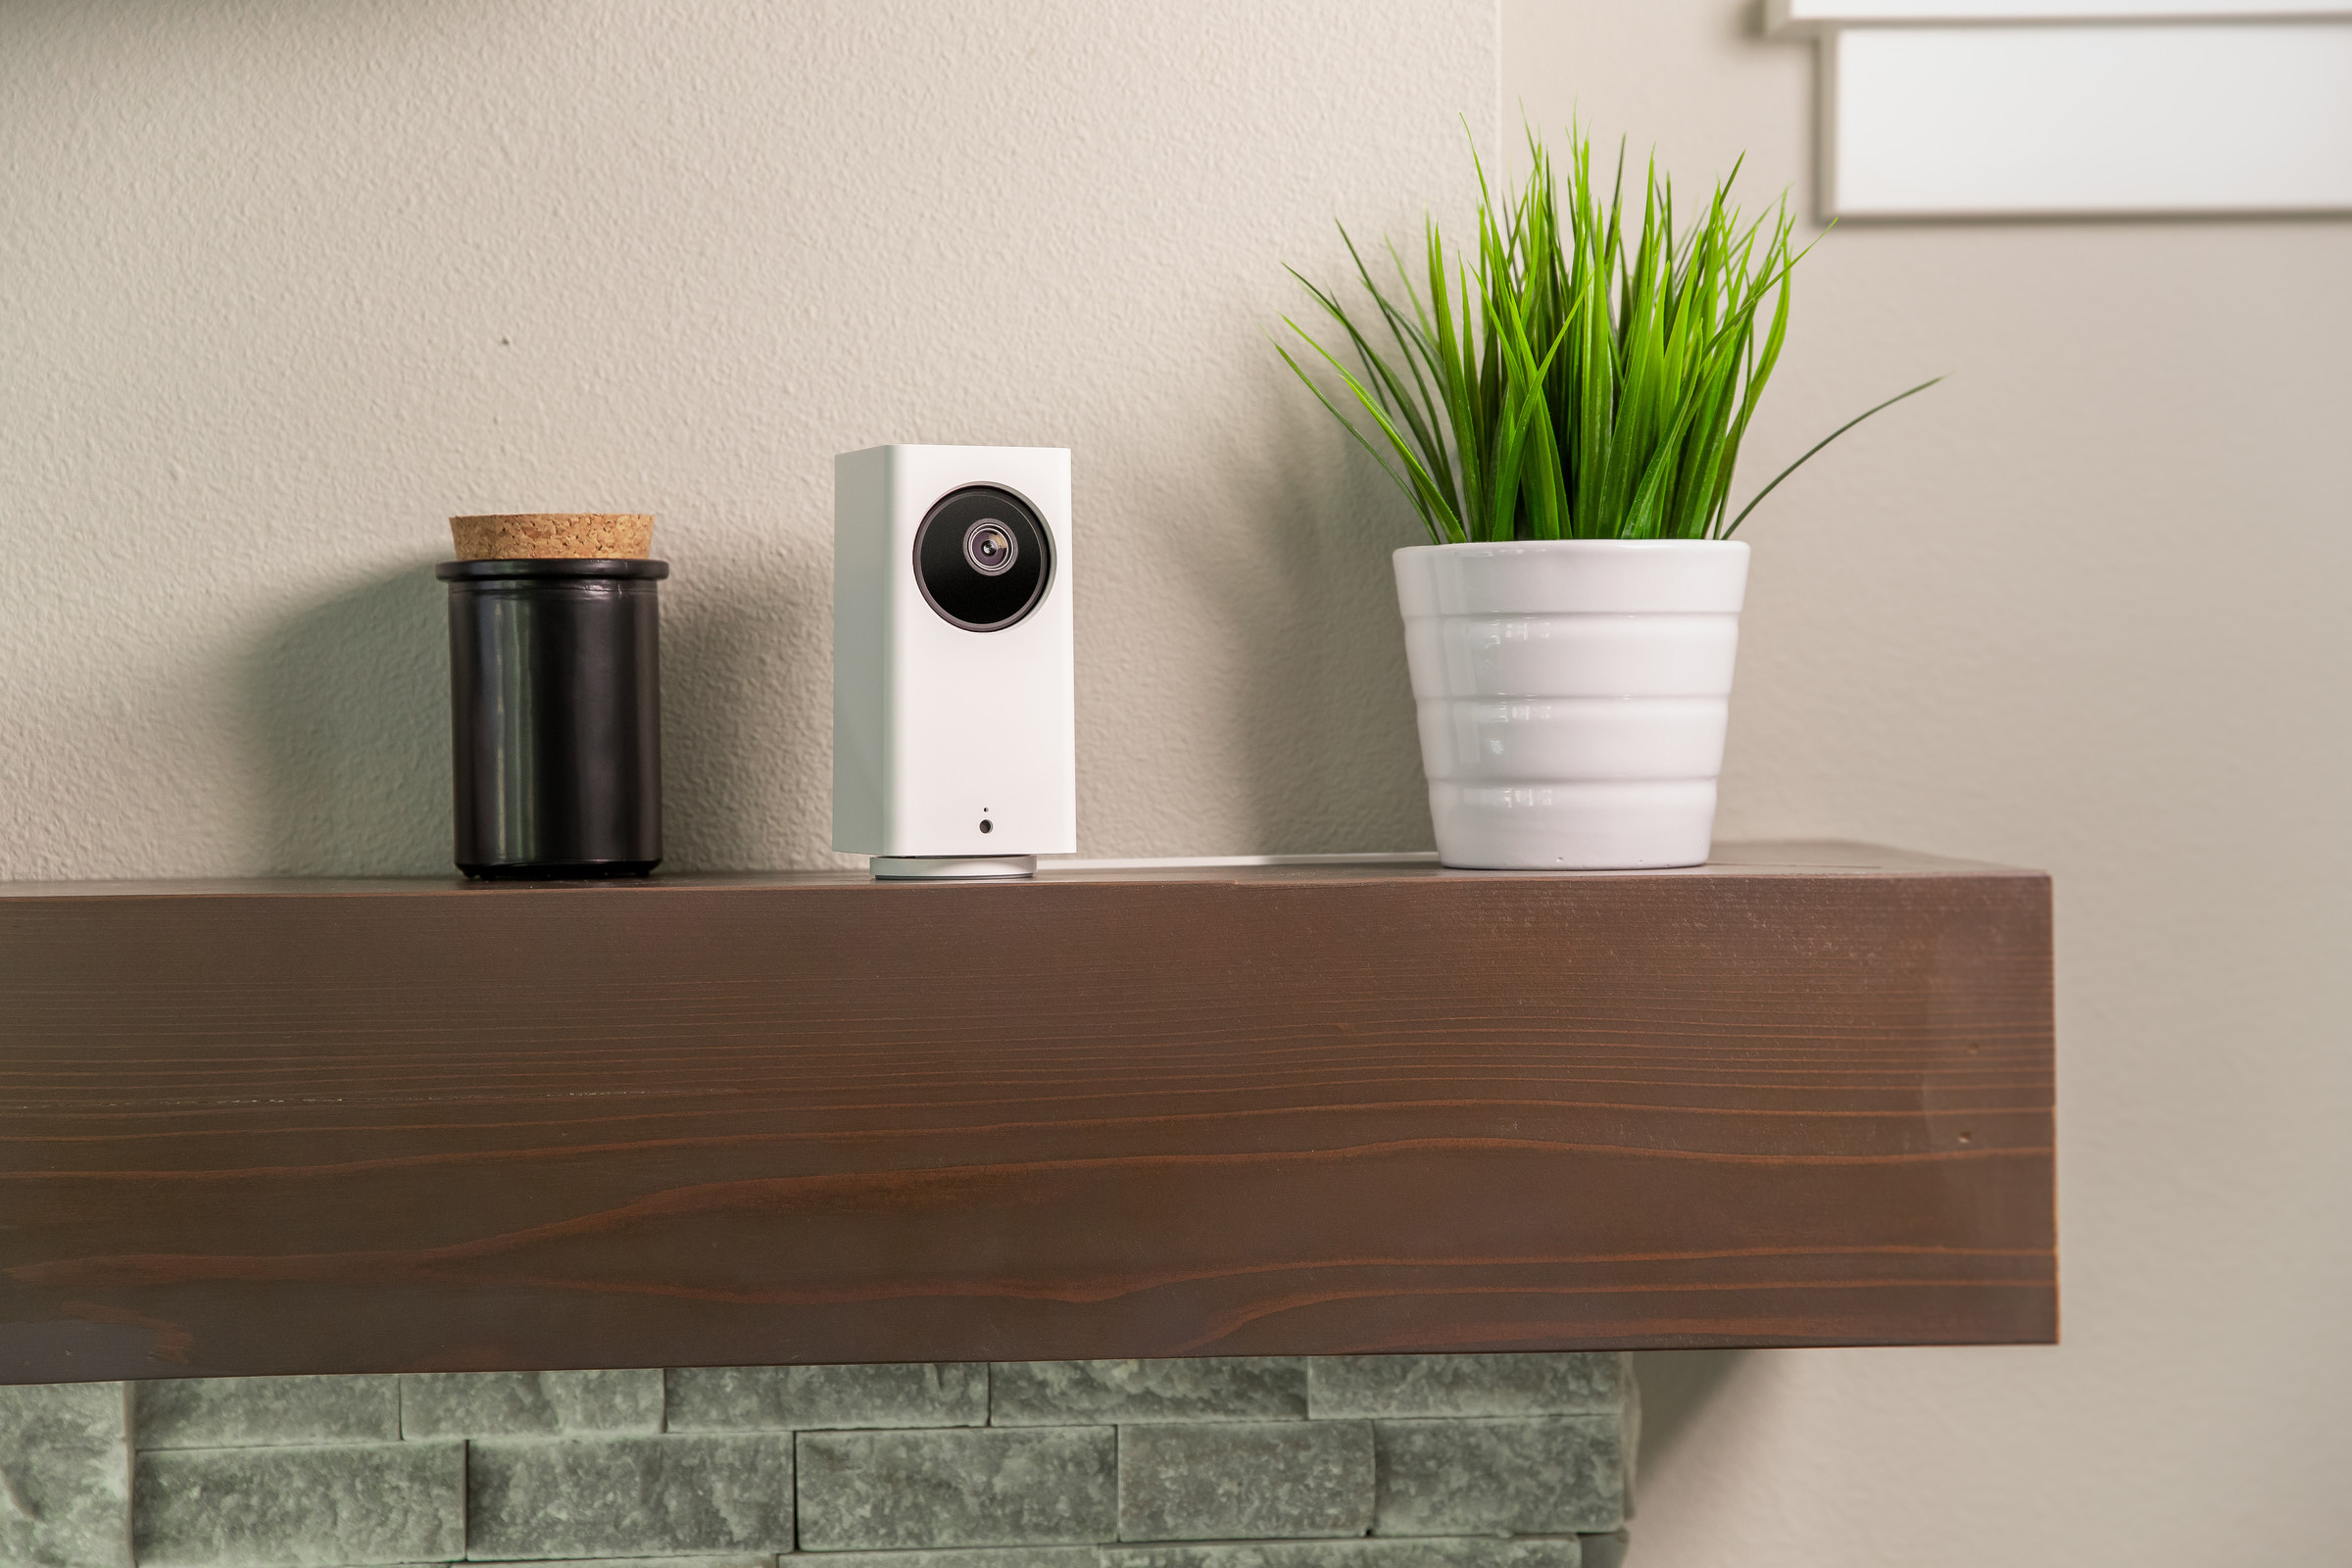 Small and swively, the new Wyze Cam is a pan and tilt camera that can survey your room a full 360 degrees.